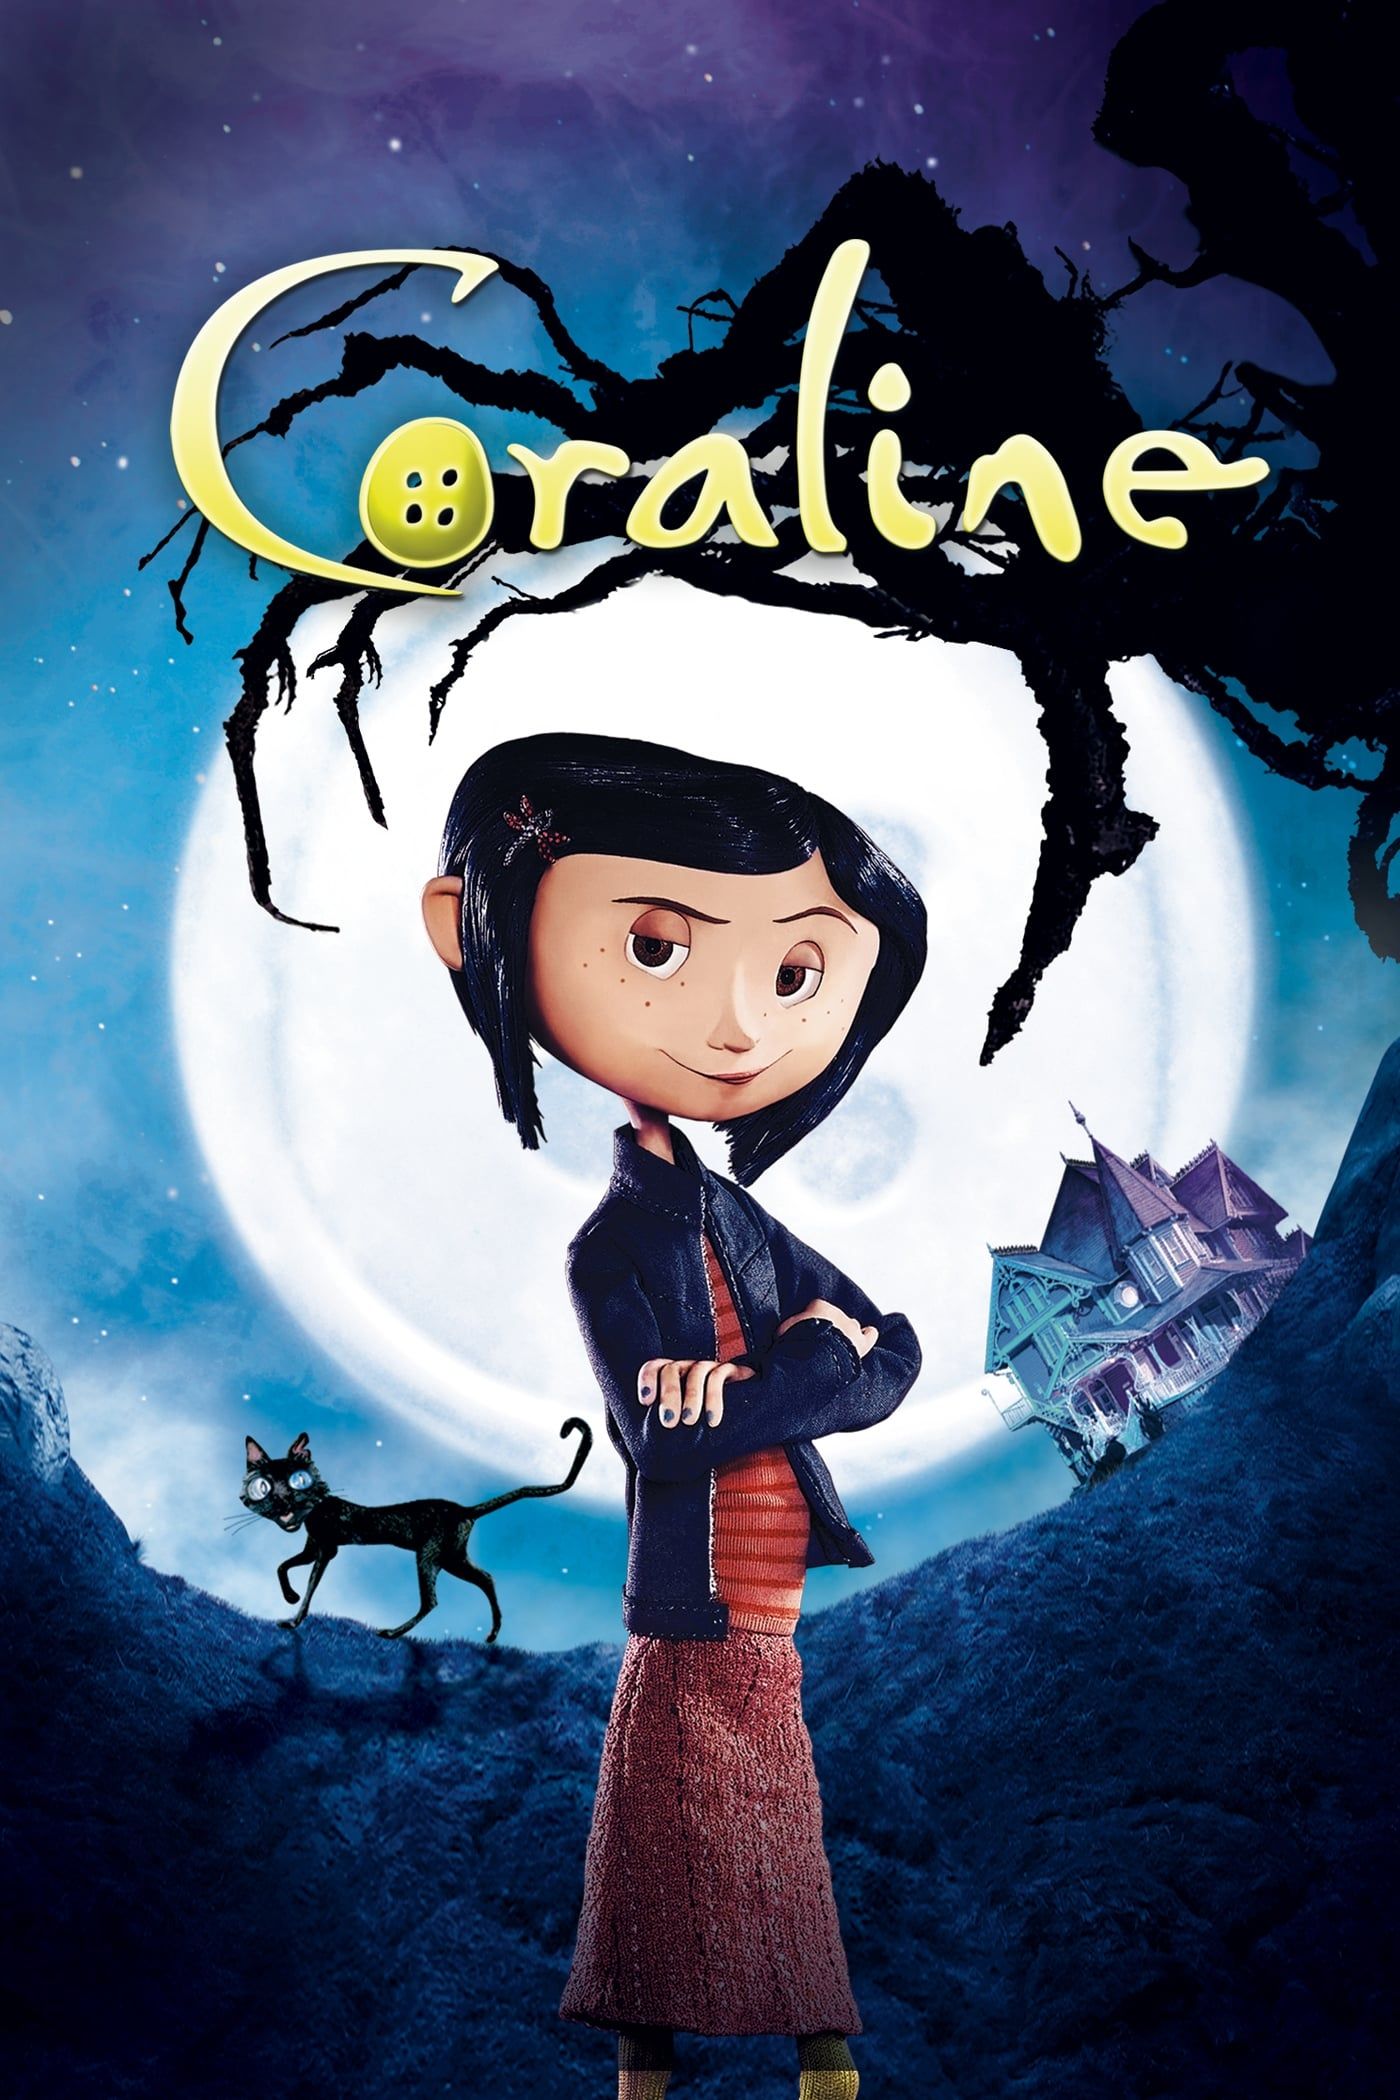 Is “Coraline” the Perfect Adaptation?, by H.R. Starzec